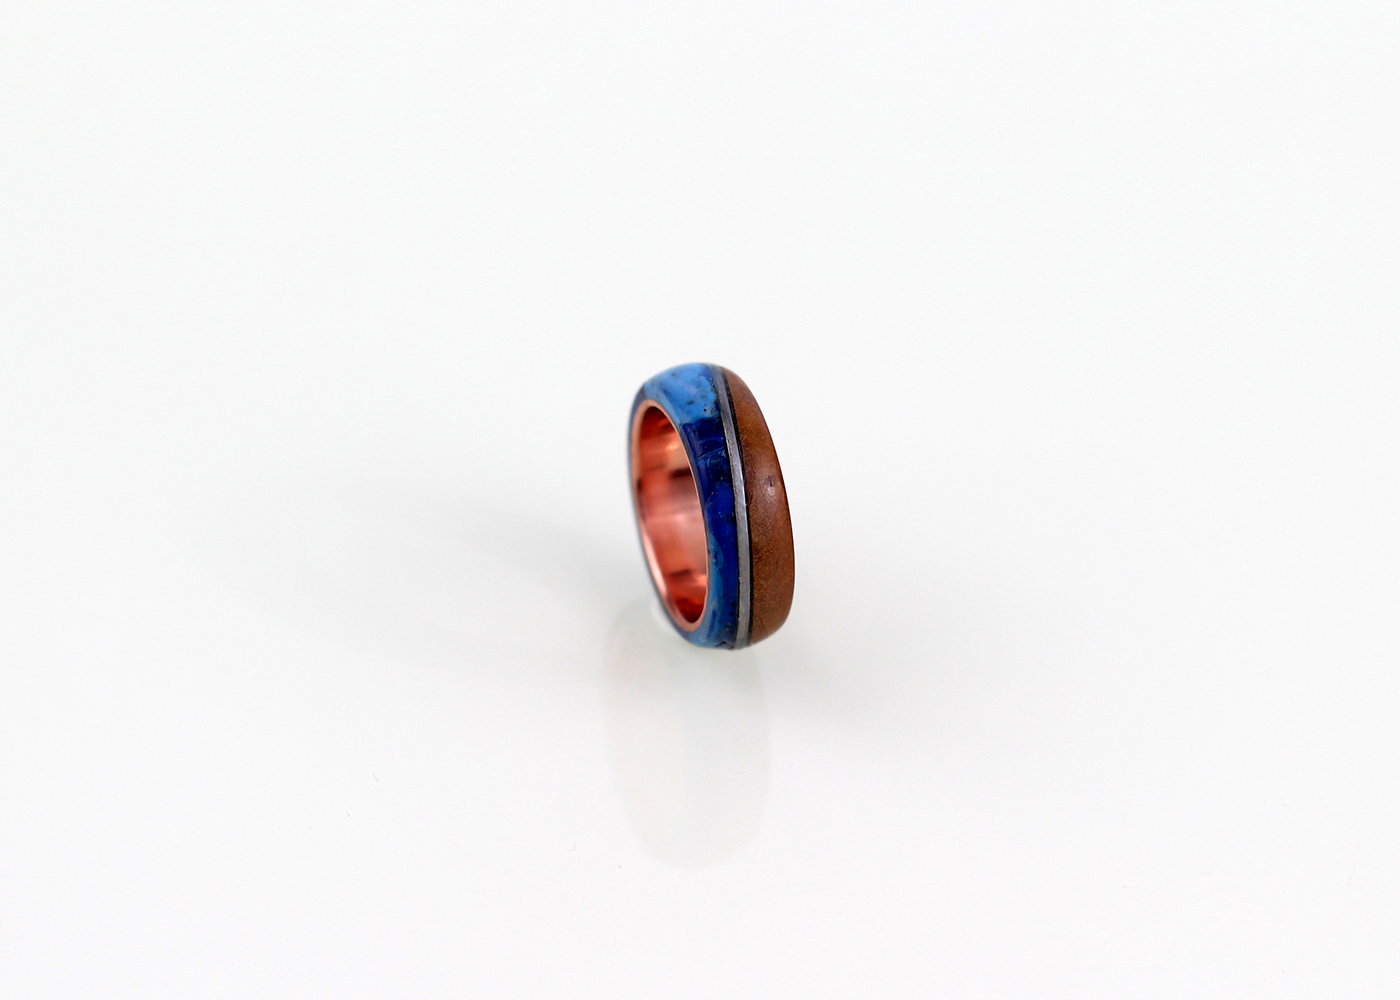 plastic rings handmade recycle colorful steel copper brass wood Accessory jewelry modern Urban abstract melted